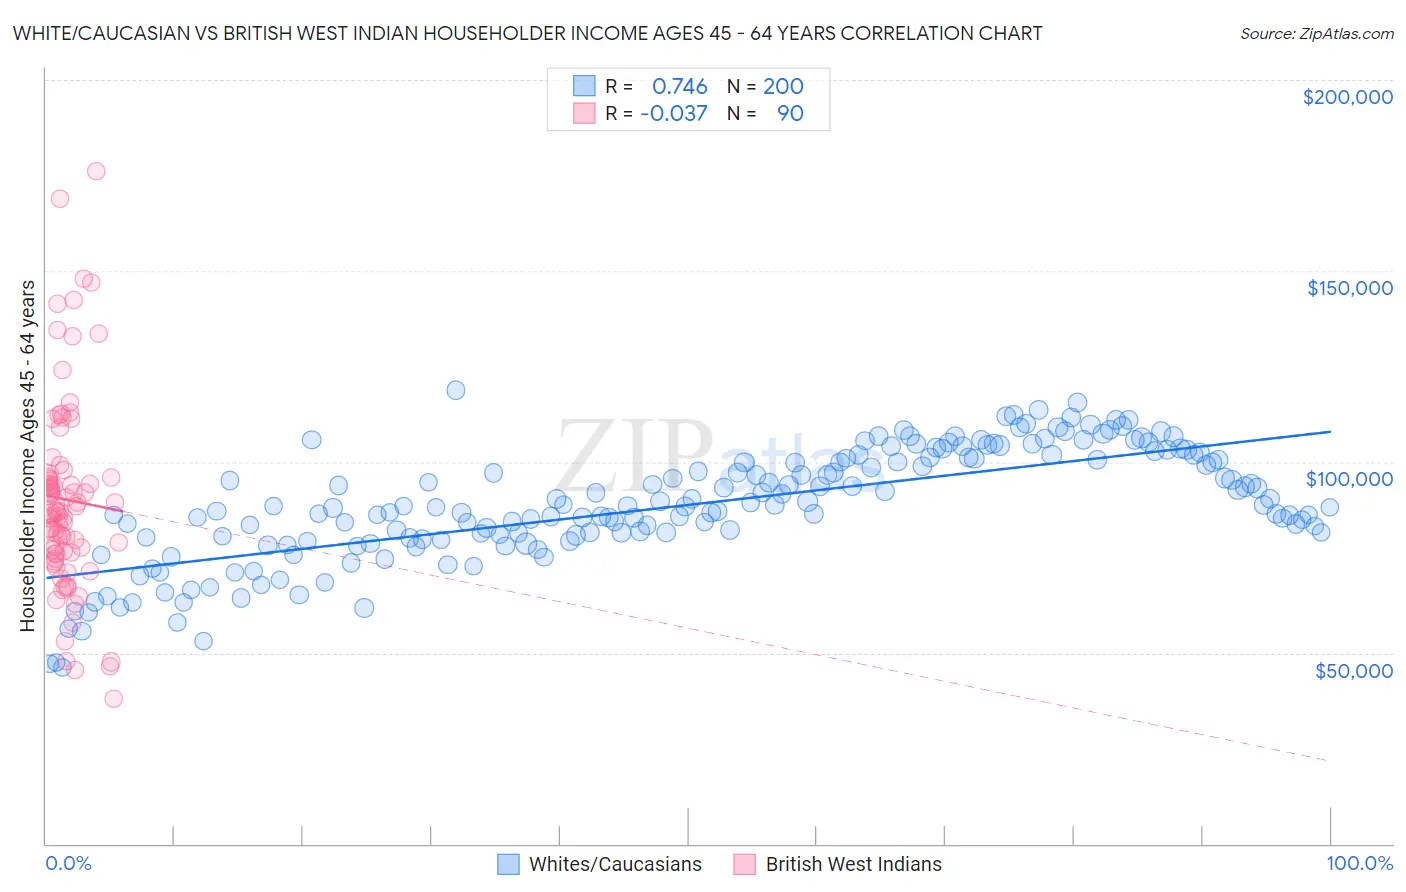 White/Caucasian vs British West Indian Householder Income Ages 45 - 64 years